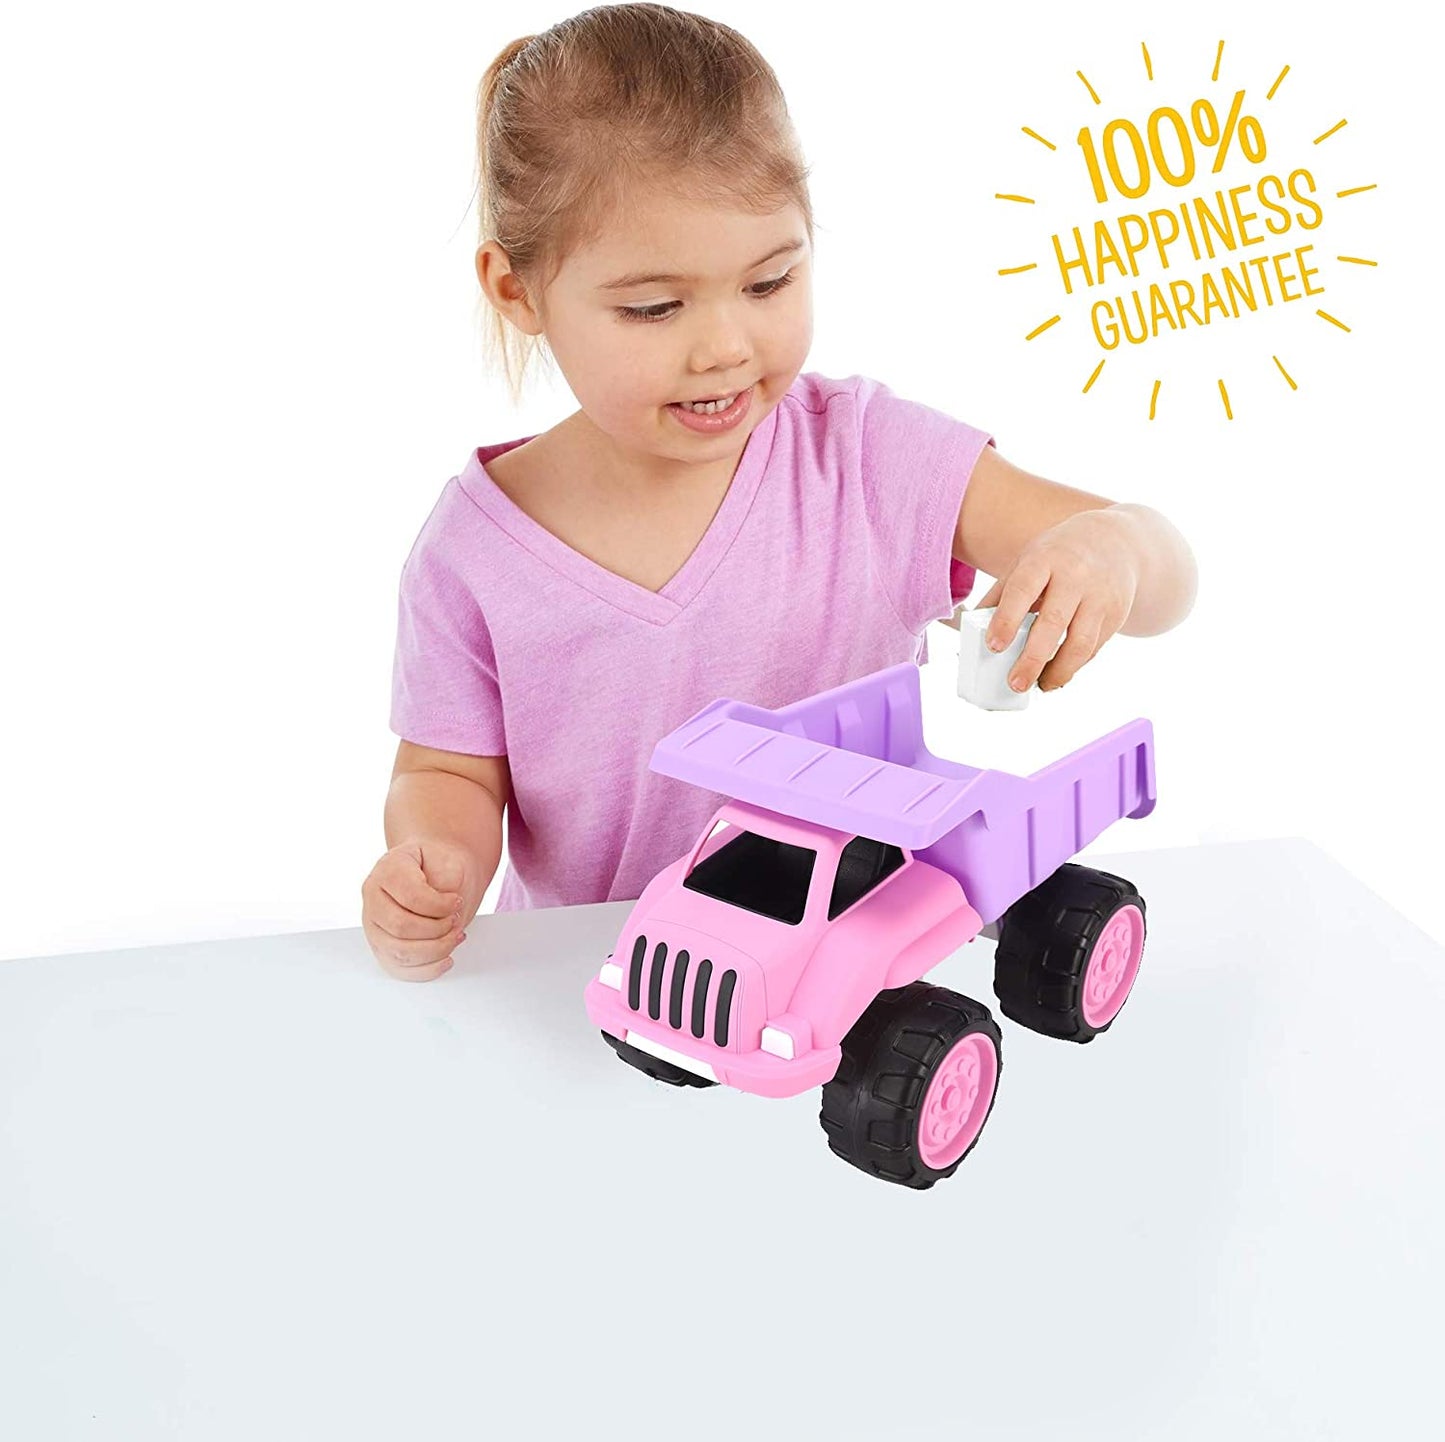 Big Plastic Dump Truck in Pink Color for Toddlers and Girls | Large Tilting Dump Bed Lorry | Free Play Toy Vehicle Indoors and Outdoors Imaginative Play